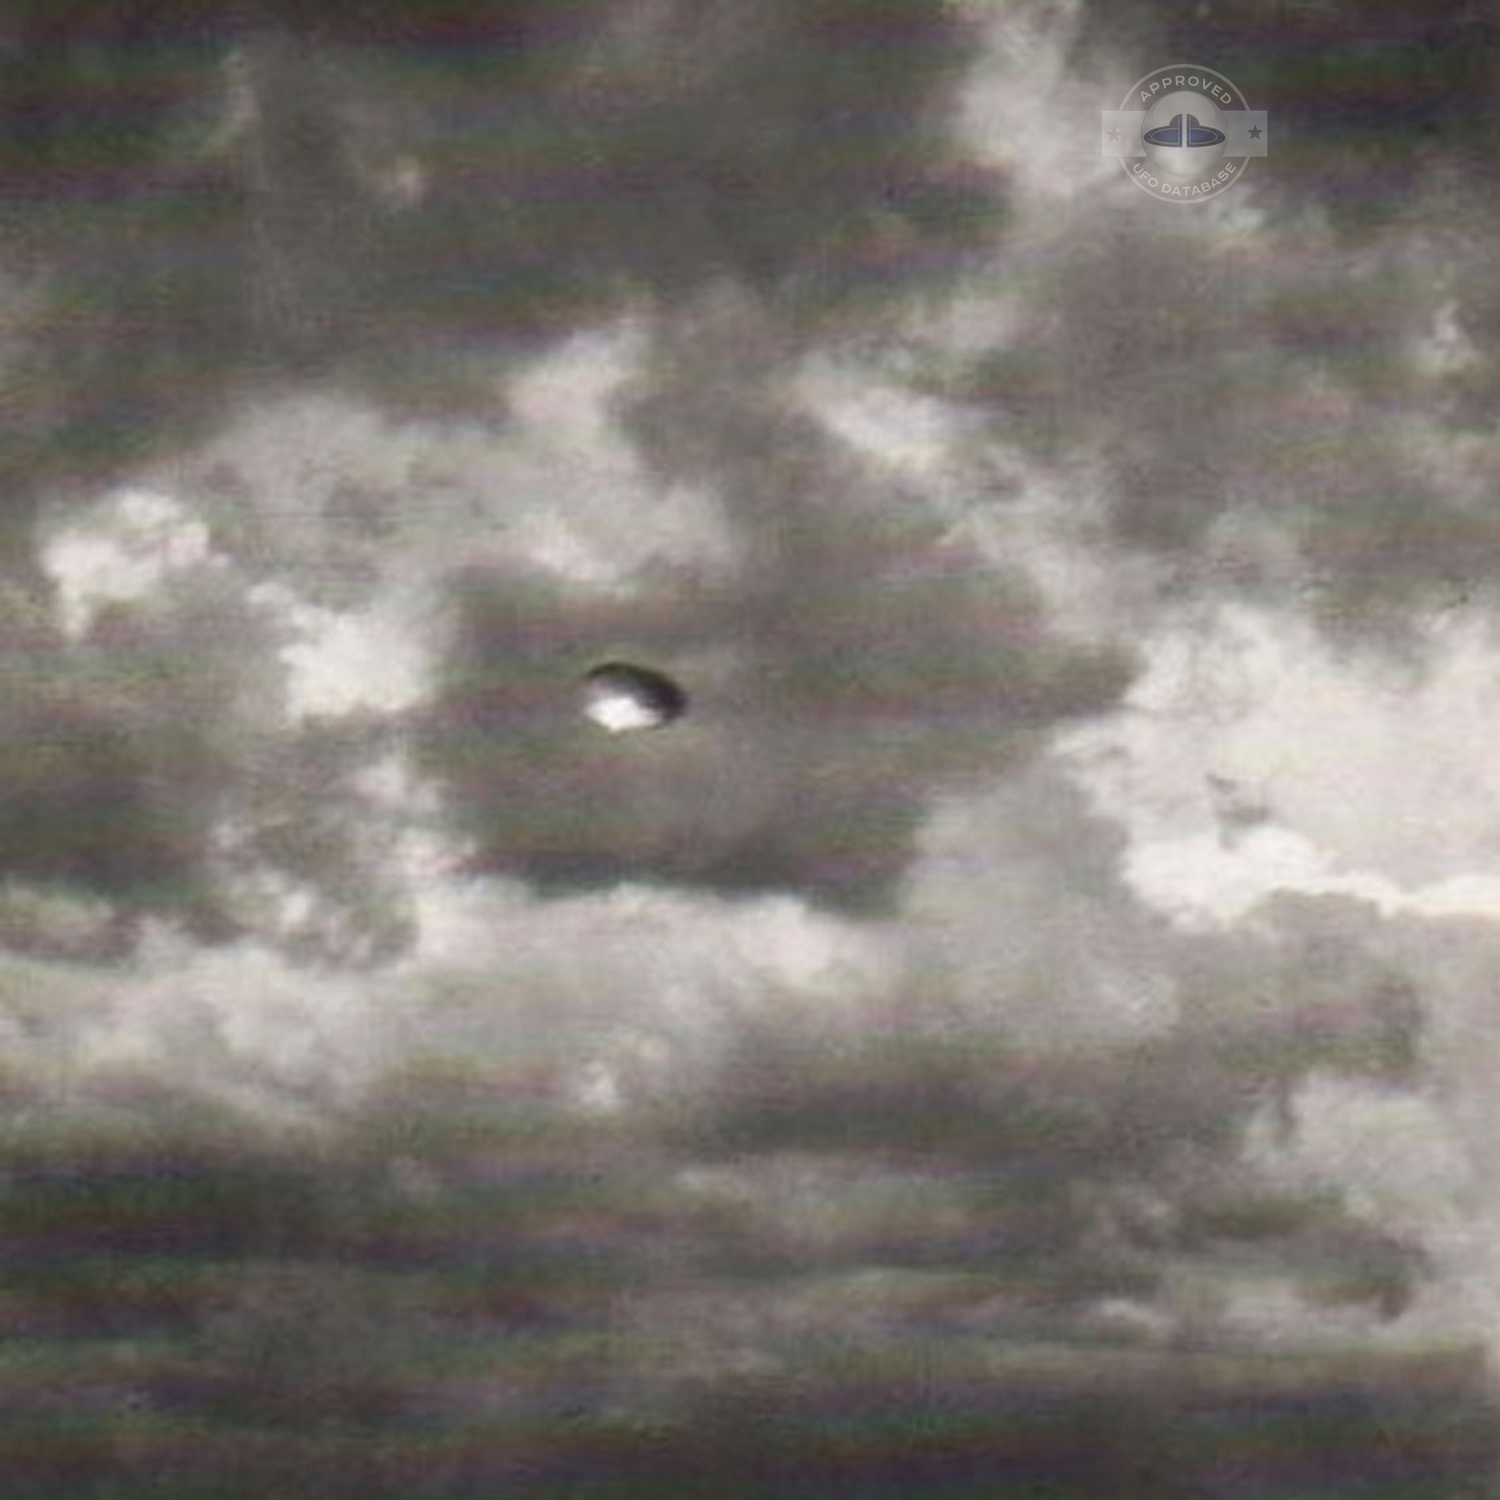 UFO picture of UFO flying over the town of Rosetta in KwaZulu-Natal UFO Picture #32-2